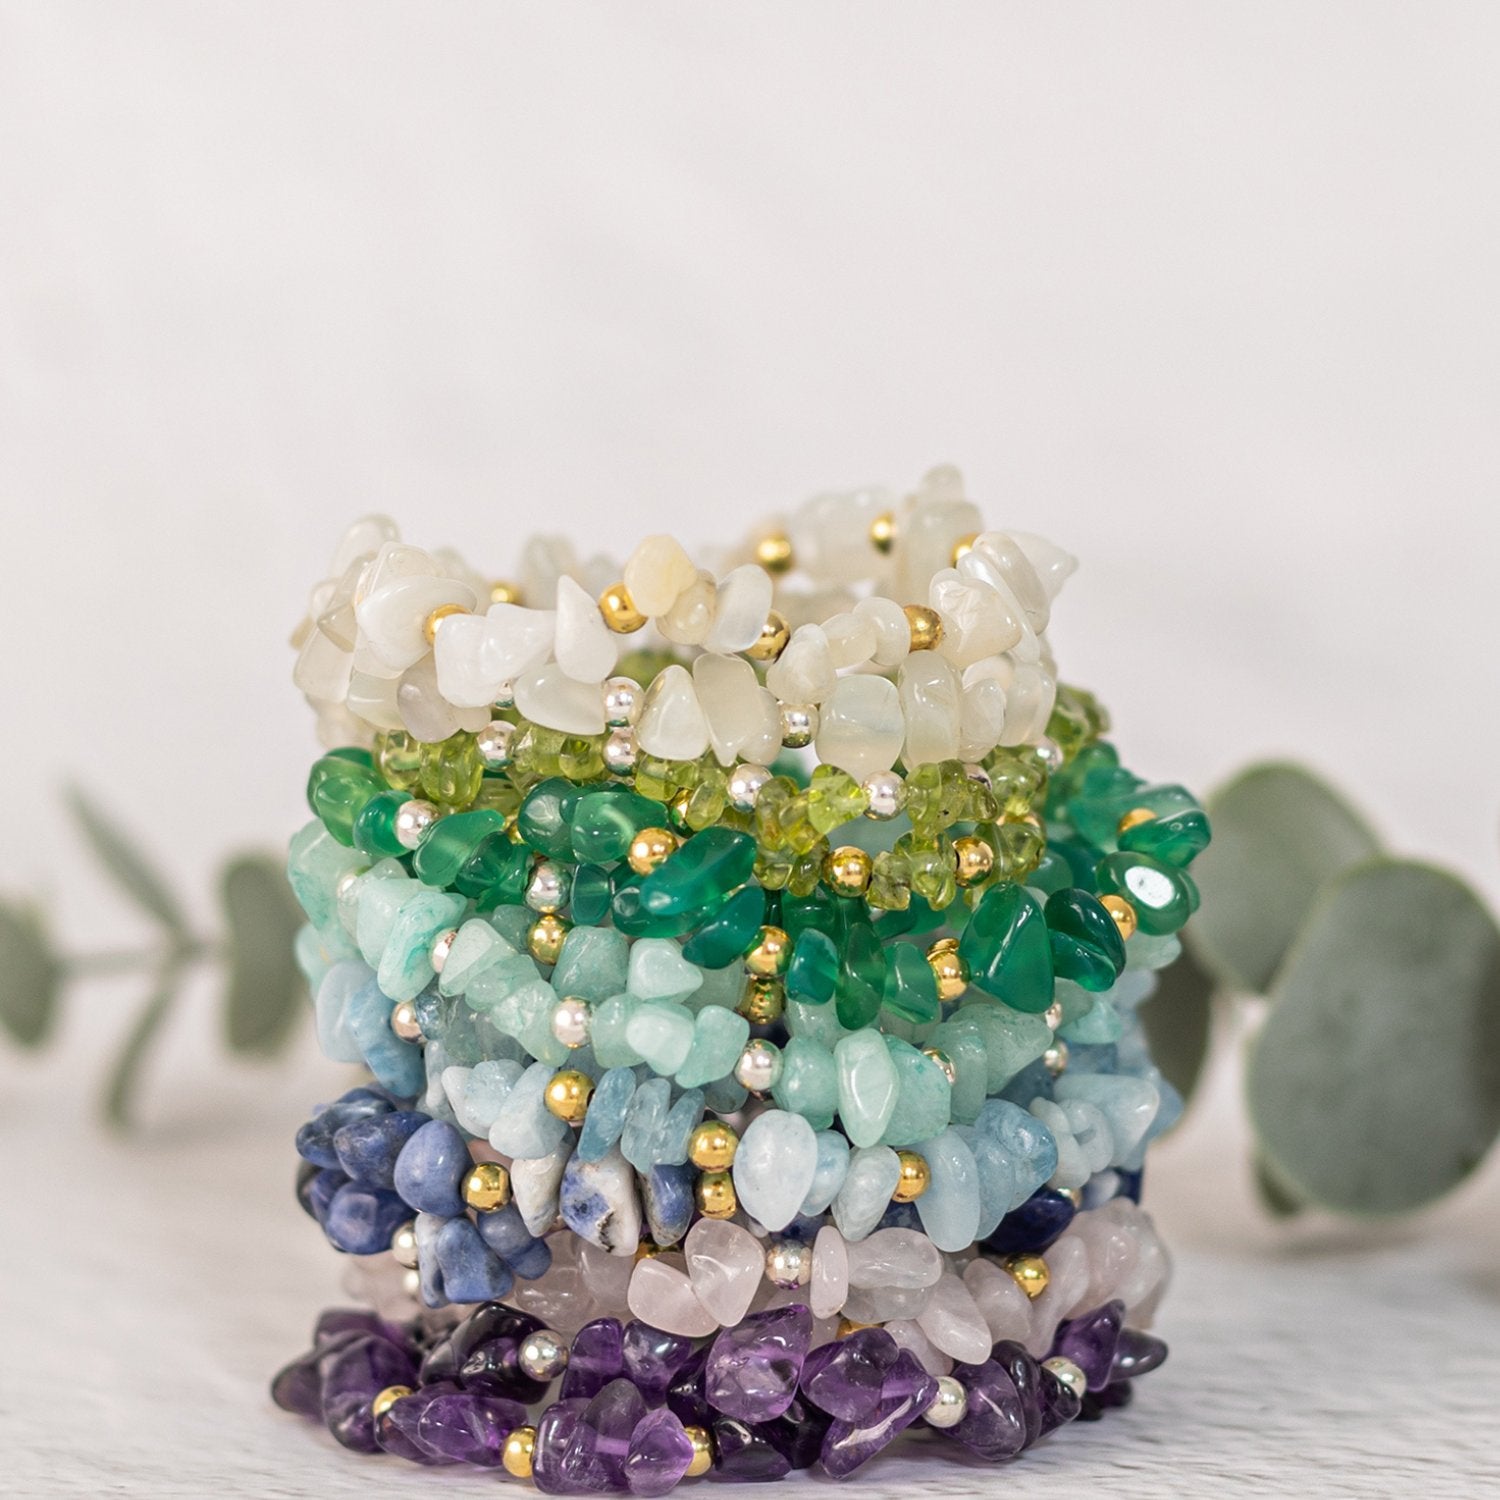  A stack of colorful gemstone bracelets made from various types of gemstones, including green, blue, white, and purple stones. The bracelets also feature small gold-colored beads and are displayed on a white surface with some greenery in the background.